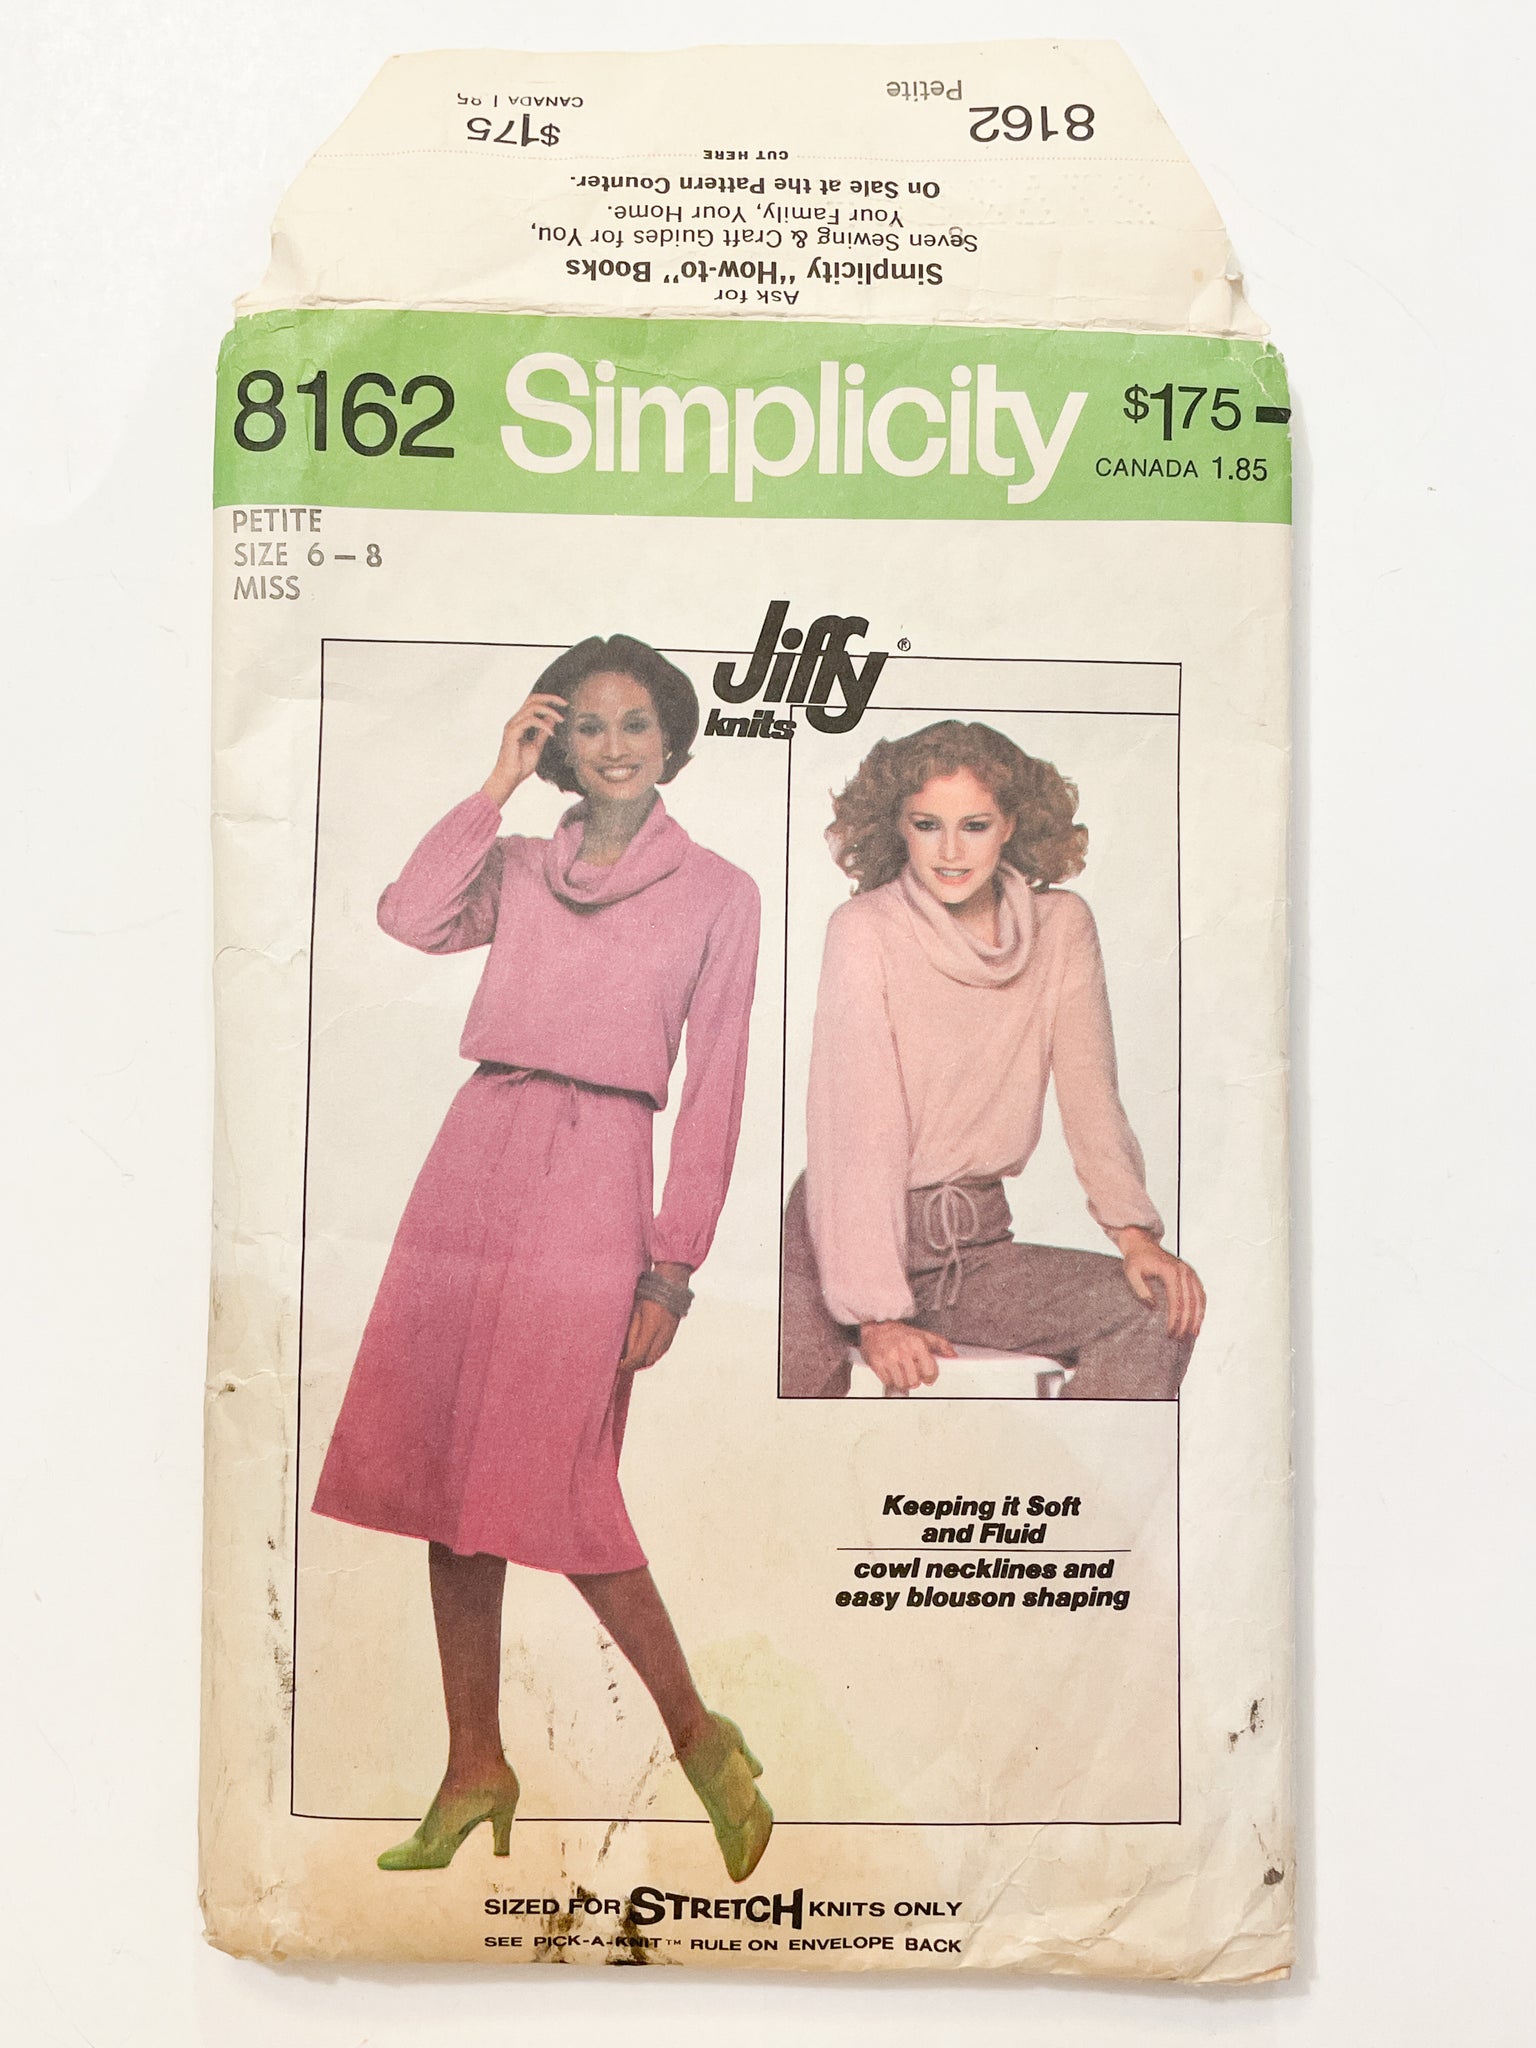 1977 Simplicity 8162 Pattern - Knit Top and Skirt